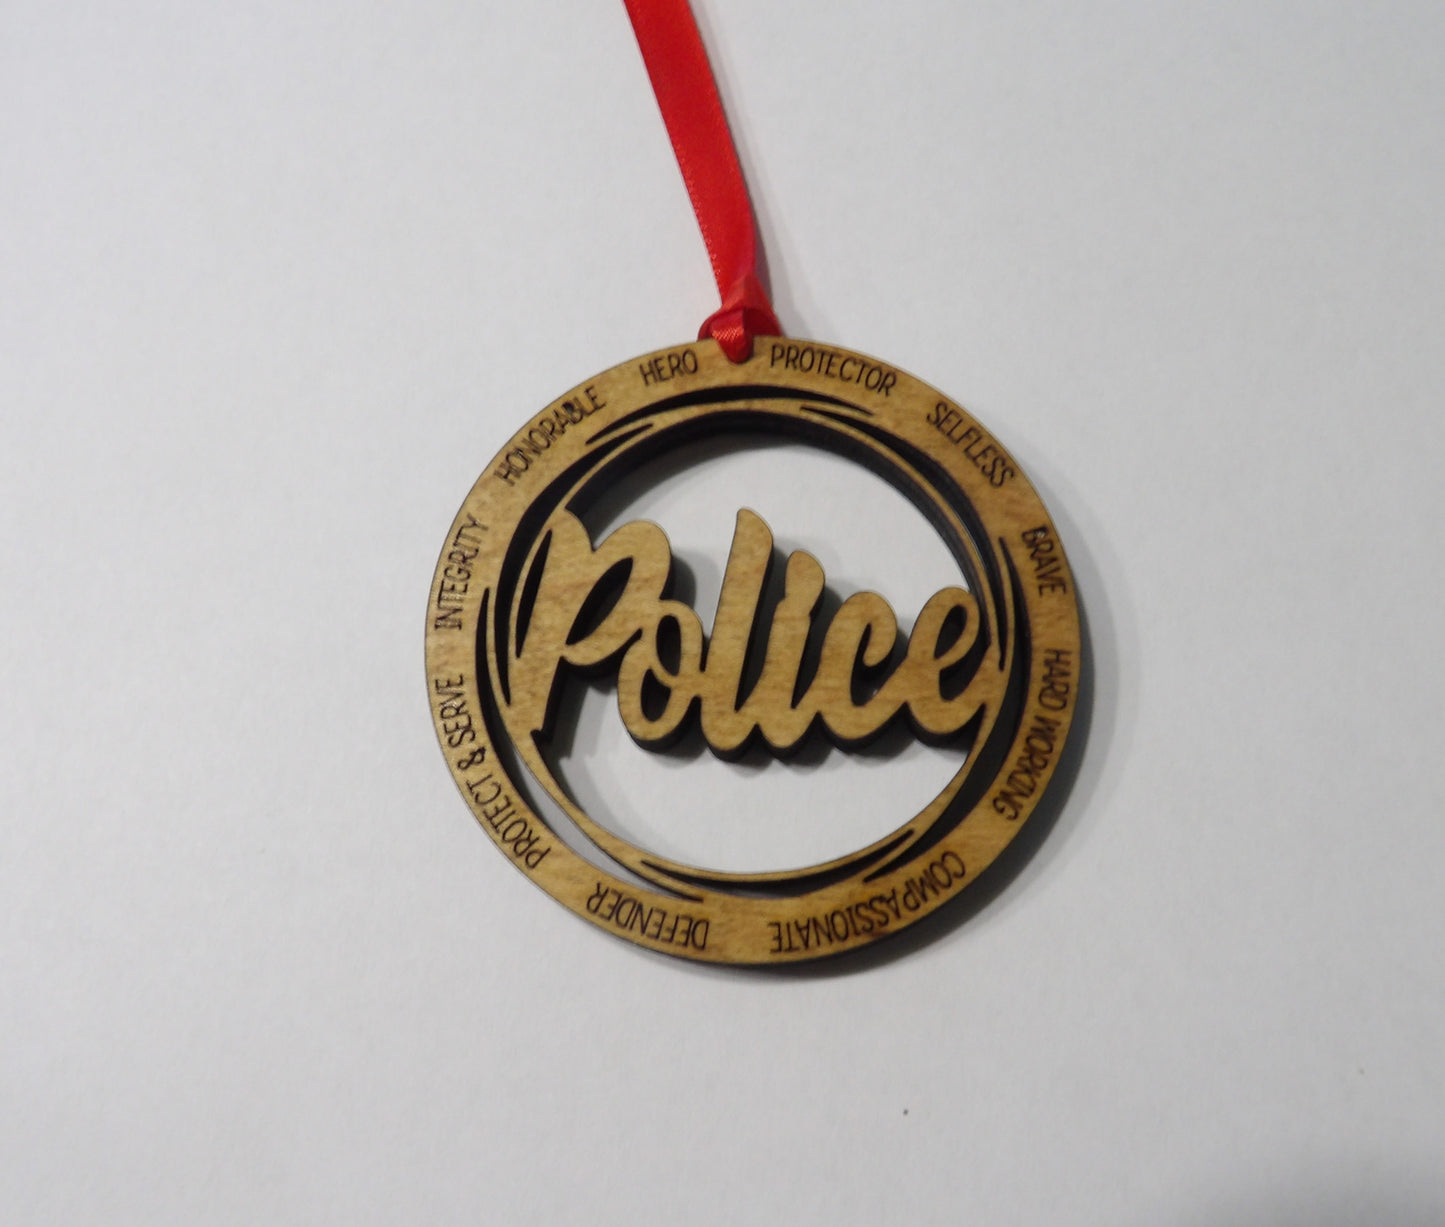 Police One Layer Wooden Christmas Tree Ornament